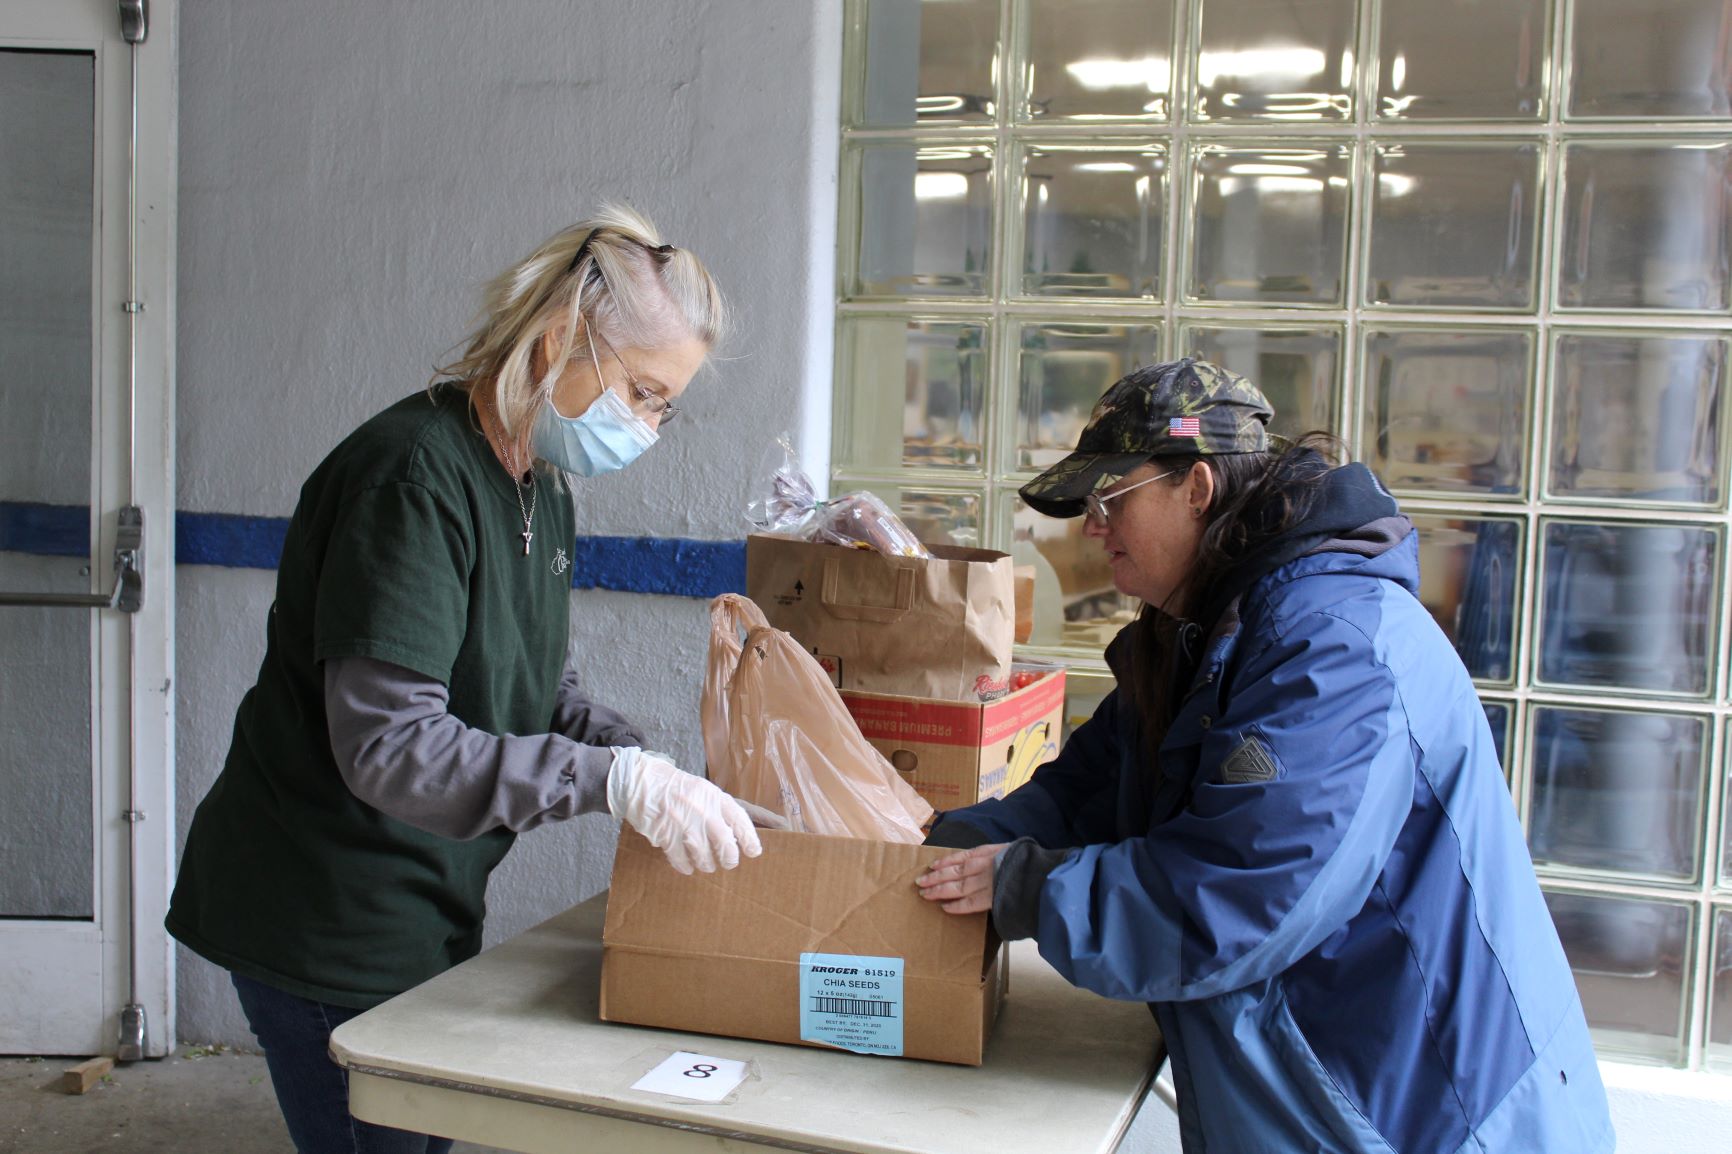 CCWVa chief executive officer, hands a box of pantry food to Sharon Rosen, a CCWVa neighbor/client.